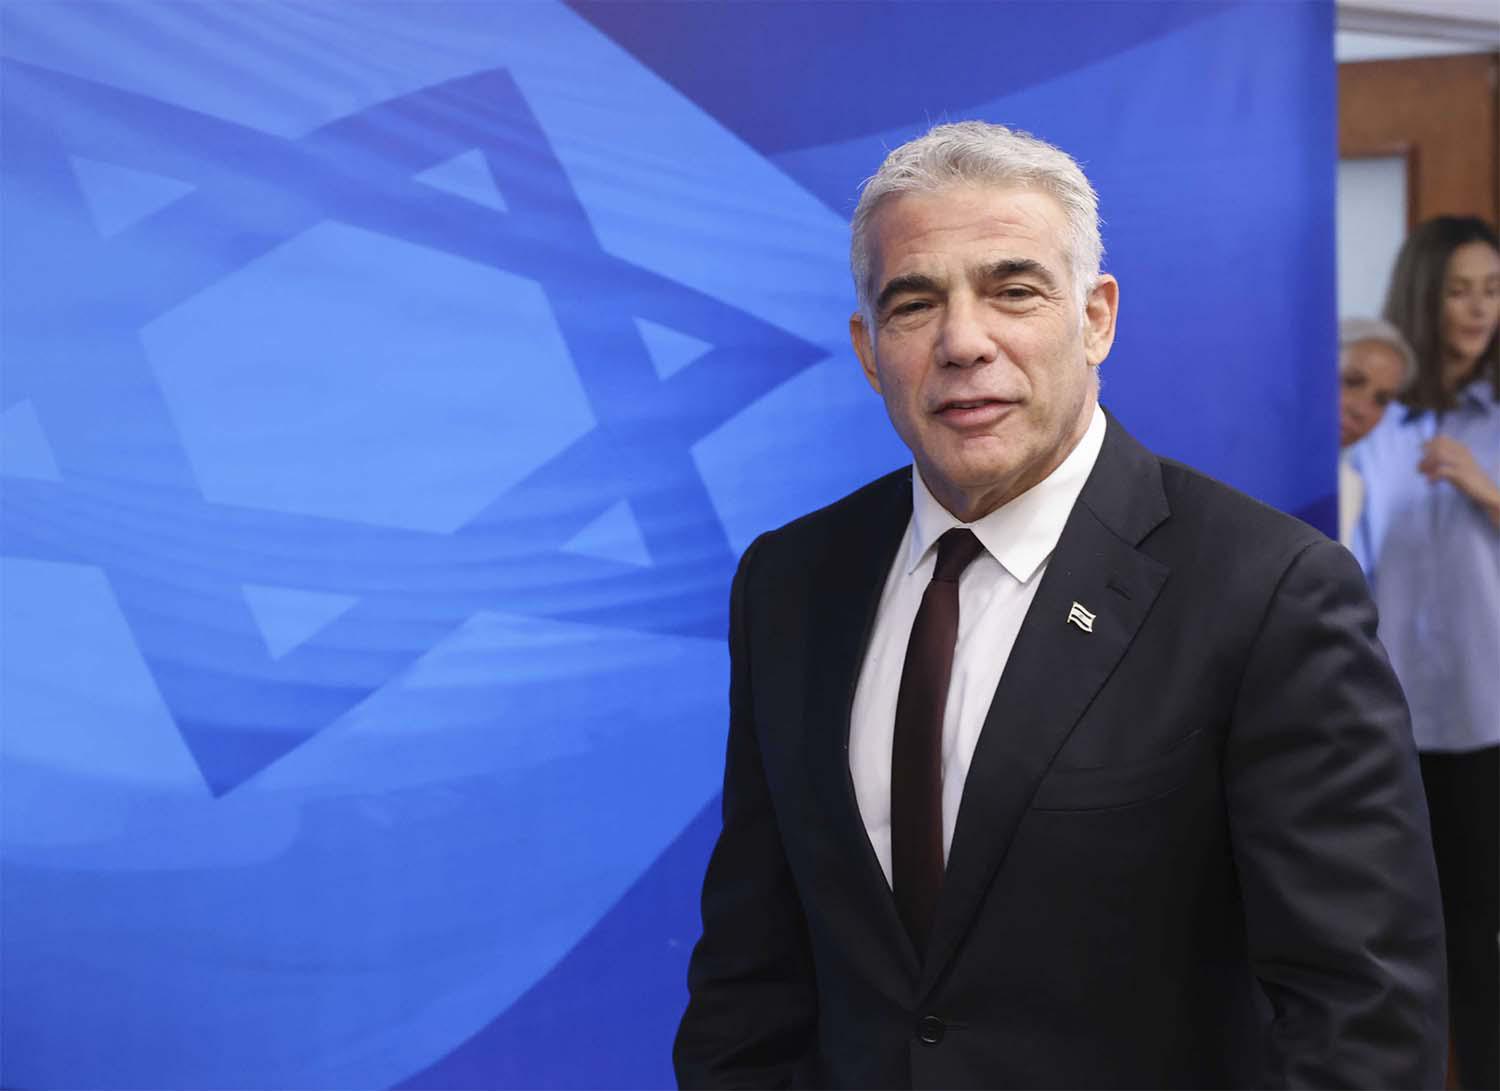 Lapid’s trip comes after the UAE and Israel normalized relations last year